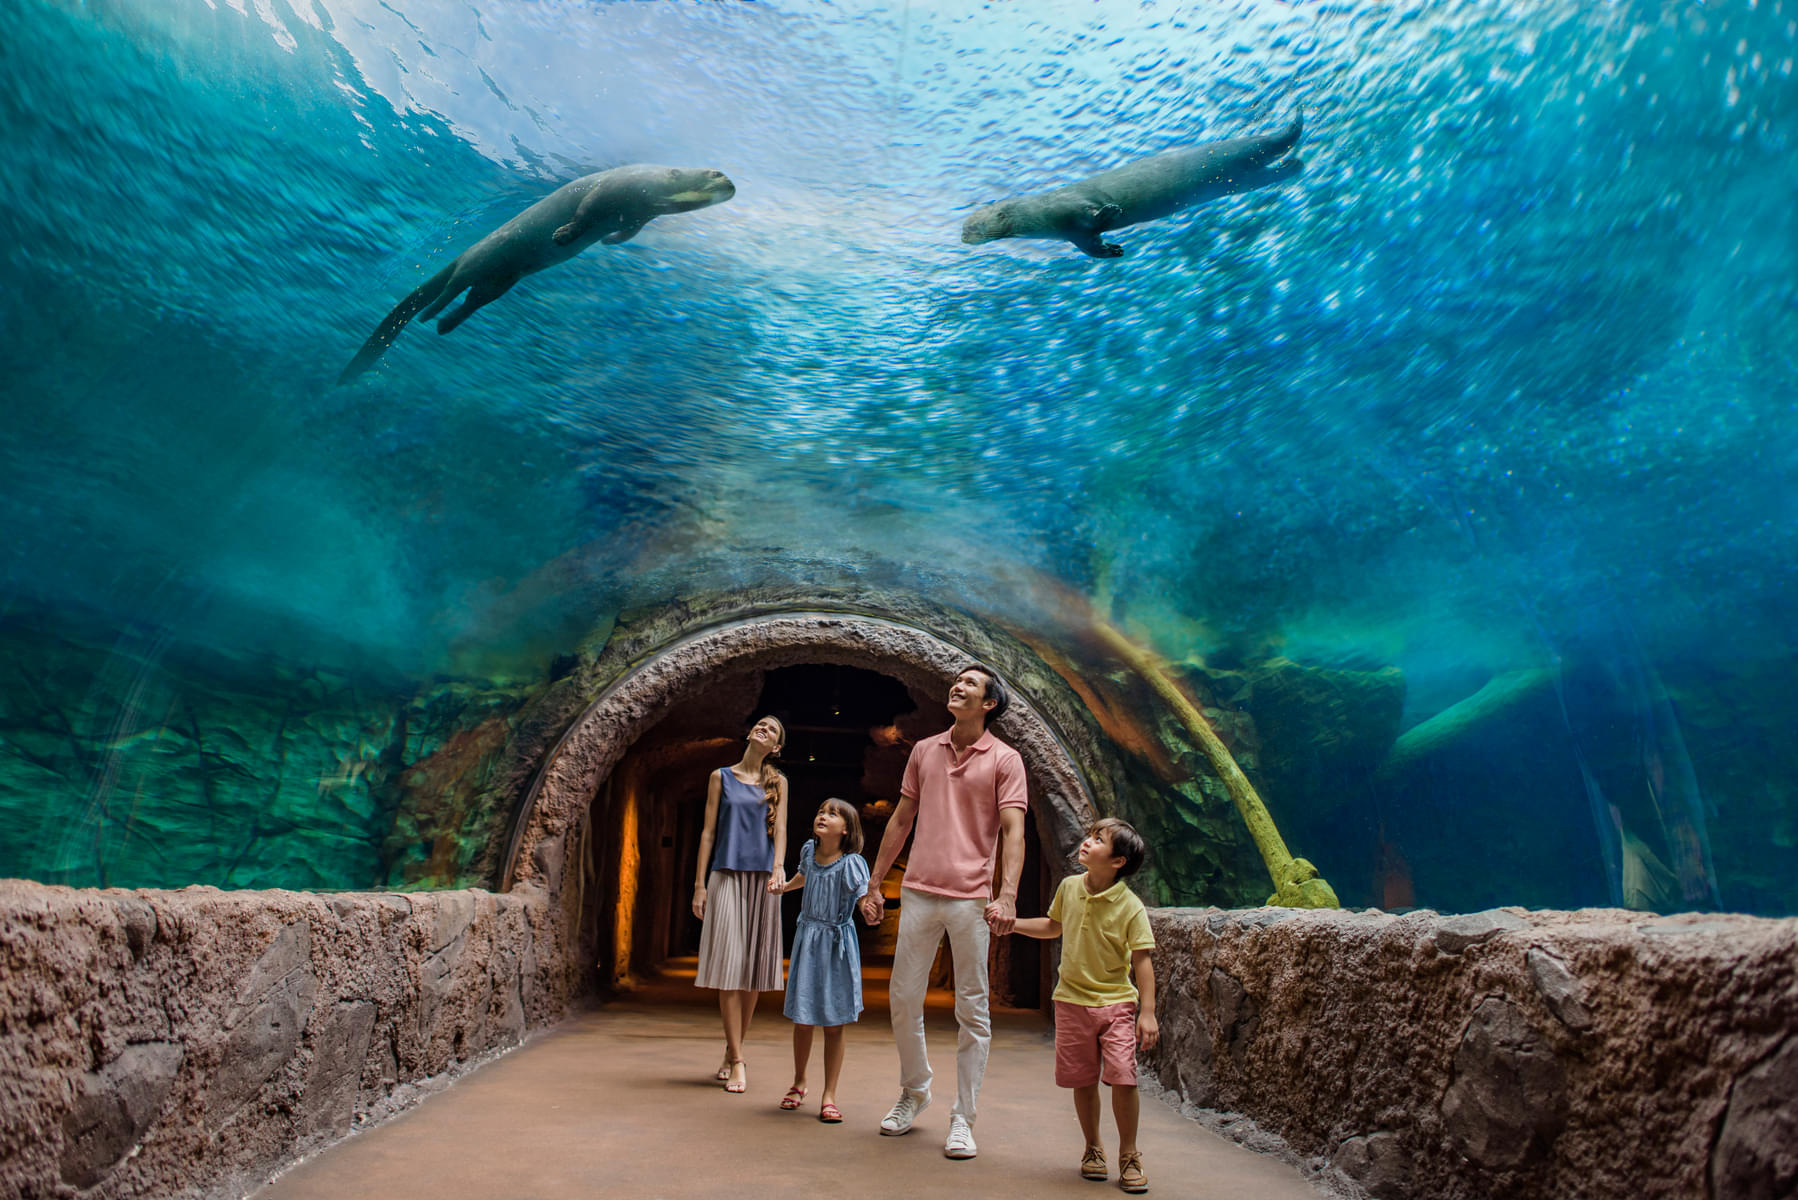 Go through the underwater tunnel and see marine animals swimming in their enclosure